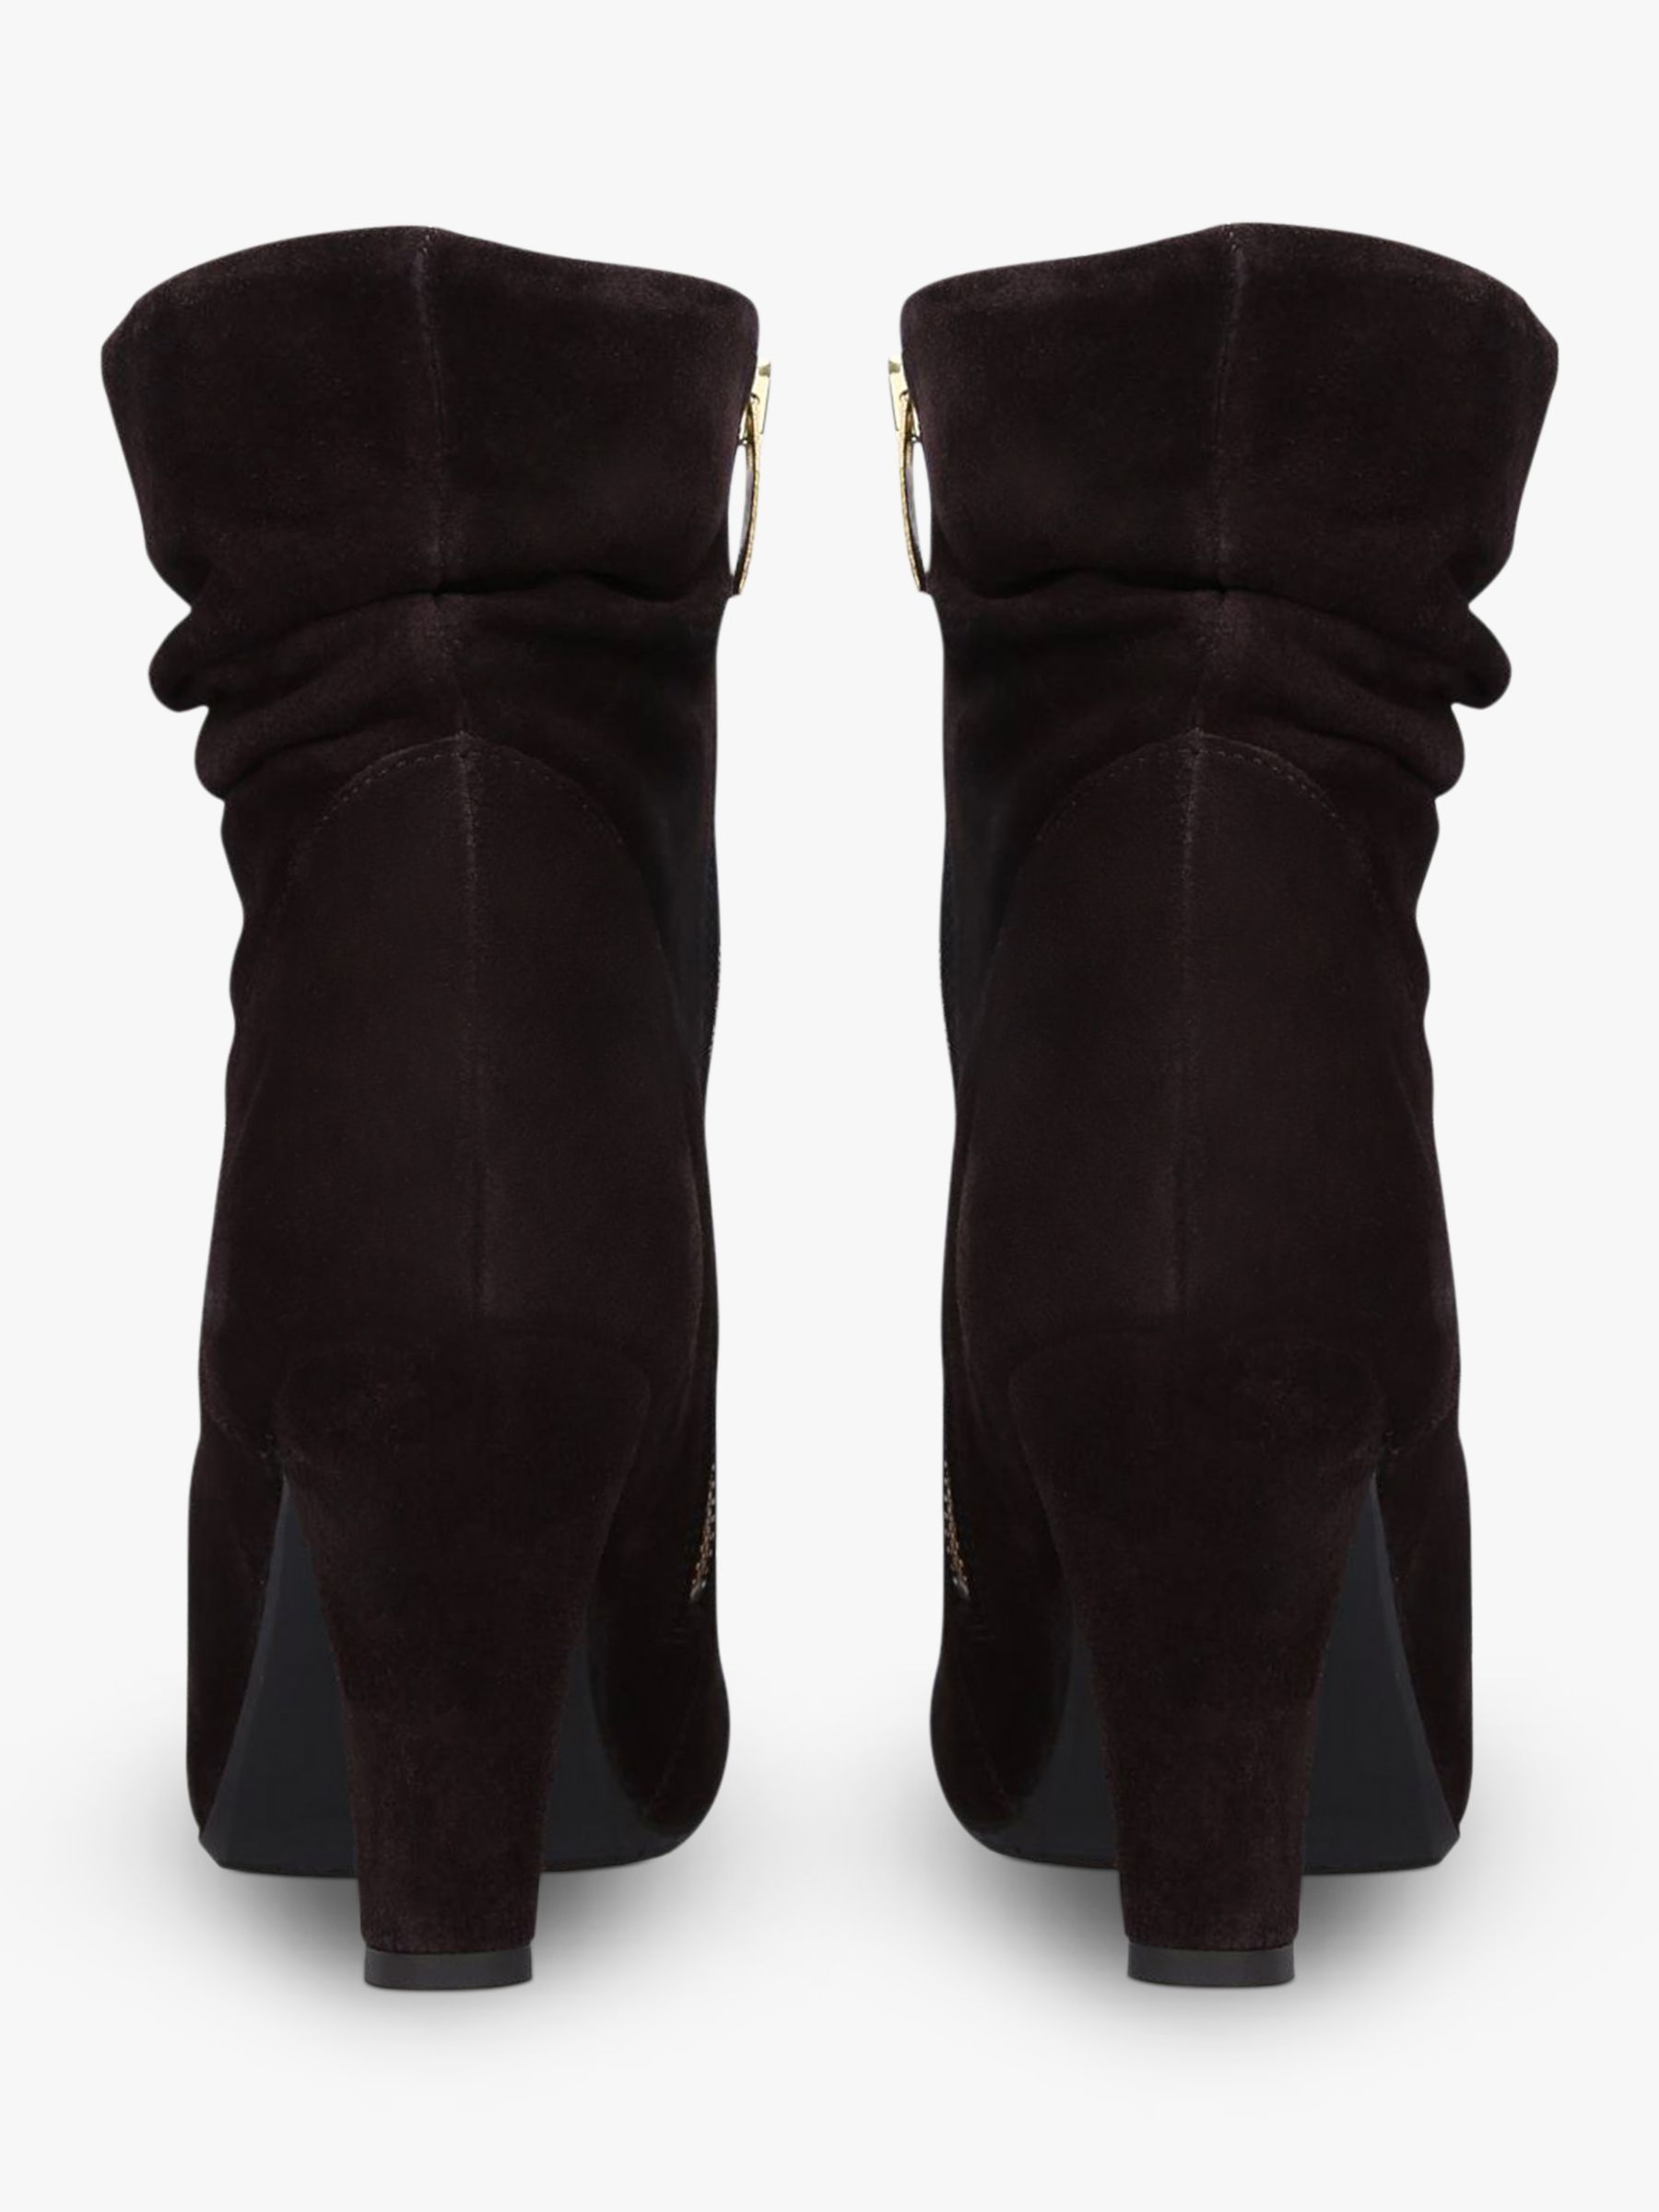 slouch ankle boots uk